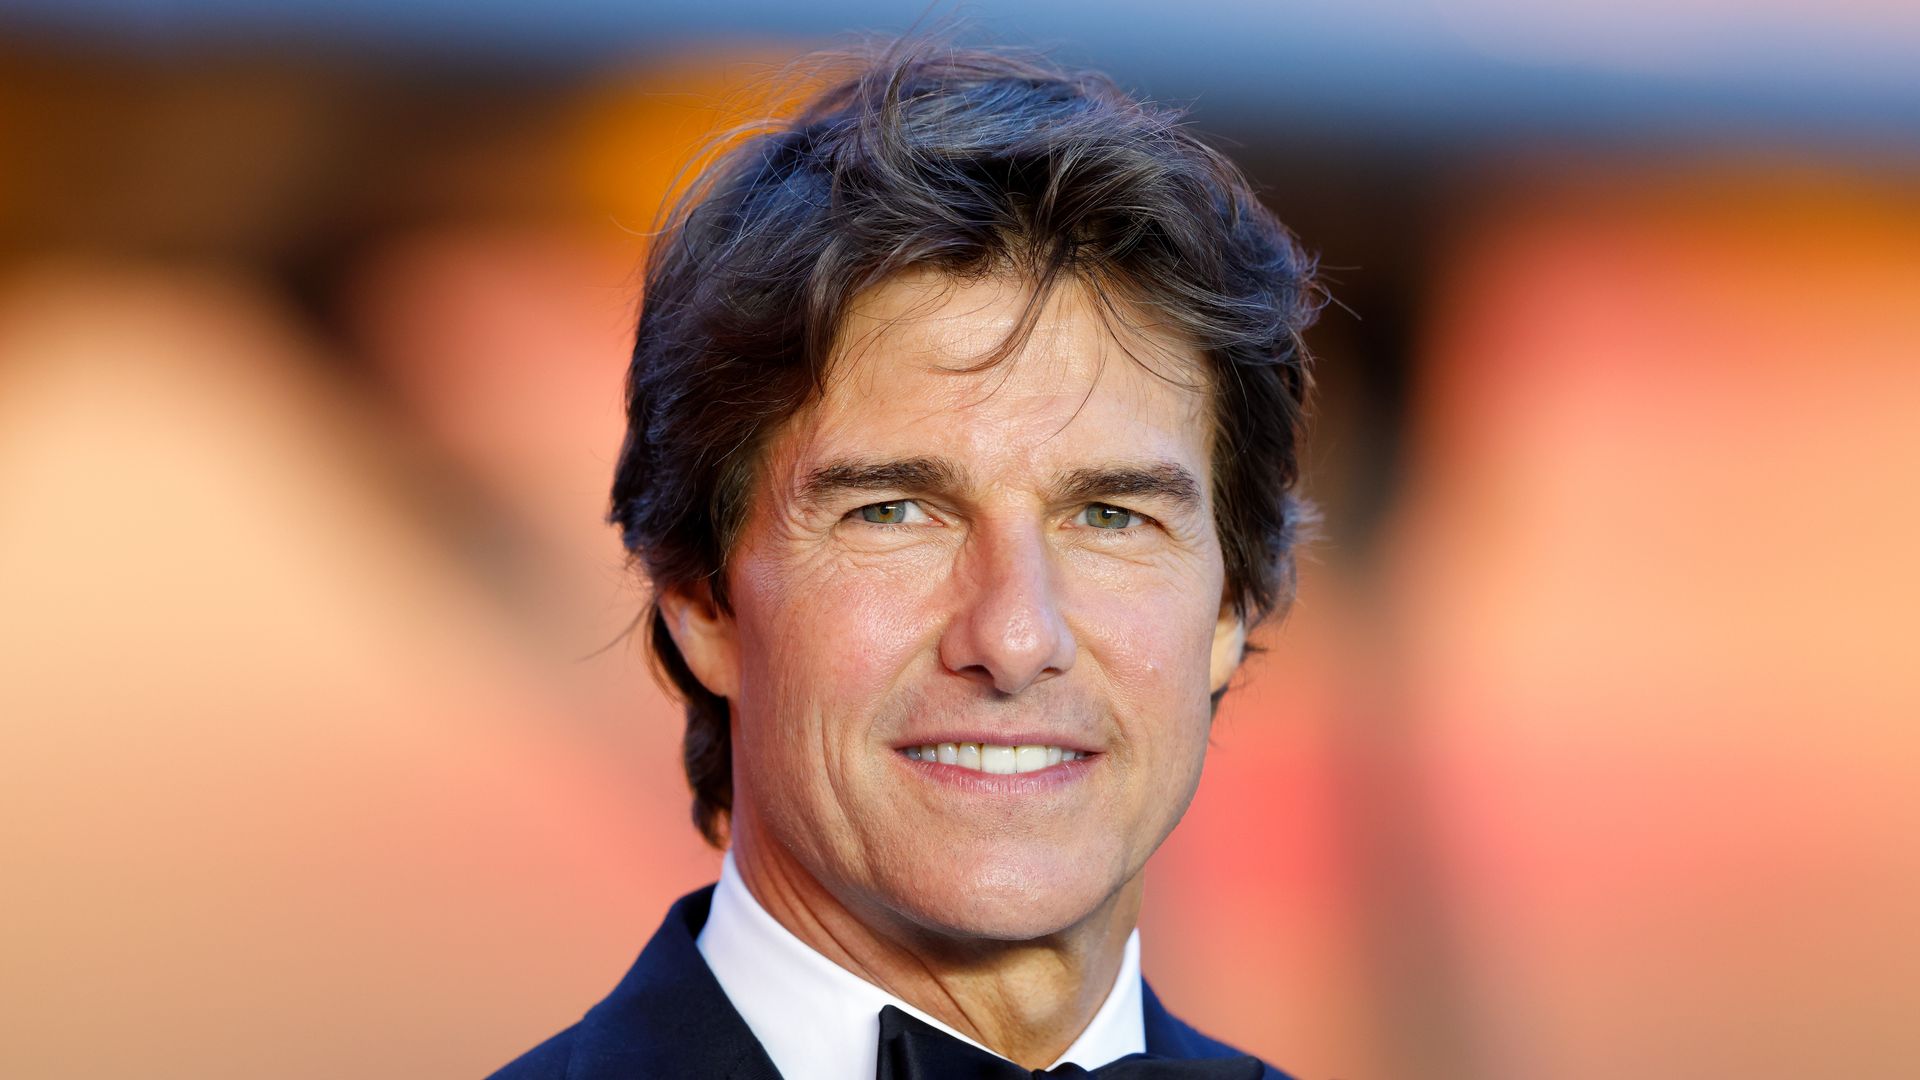 Tom Cruise's time apart from son Connor sparked emotional response on set, former director reveals